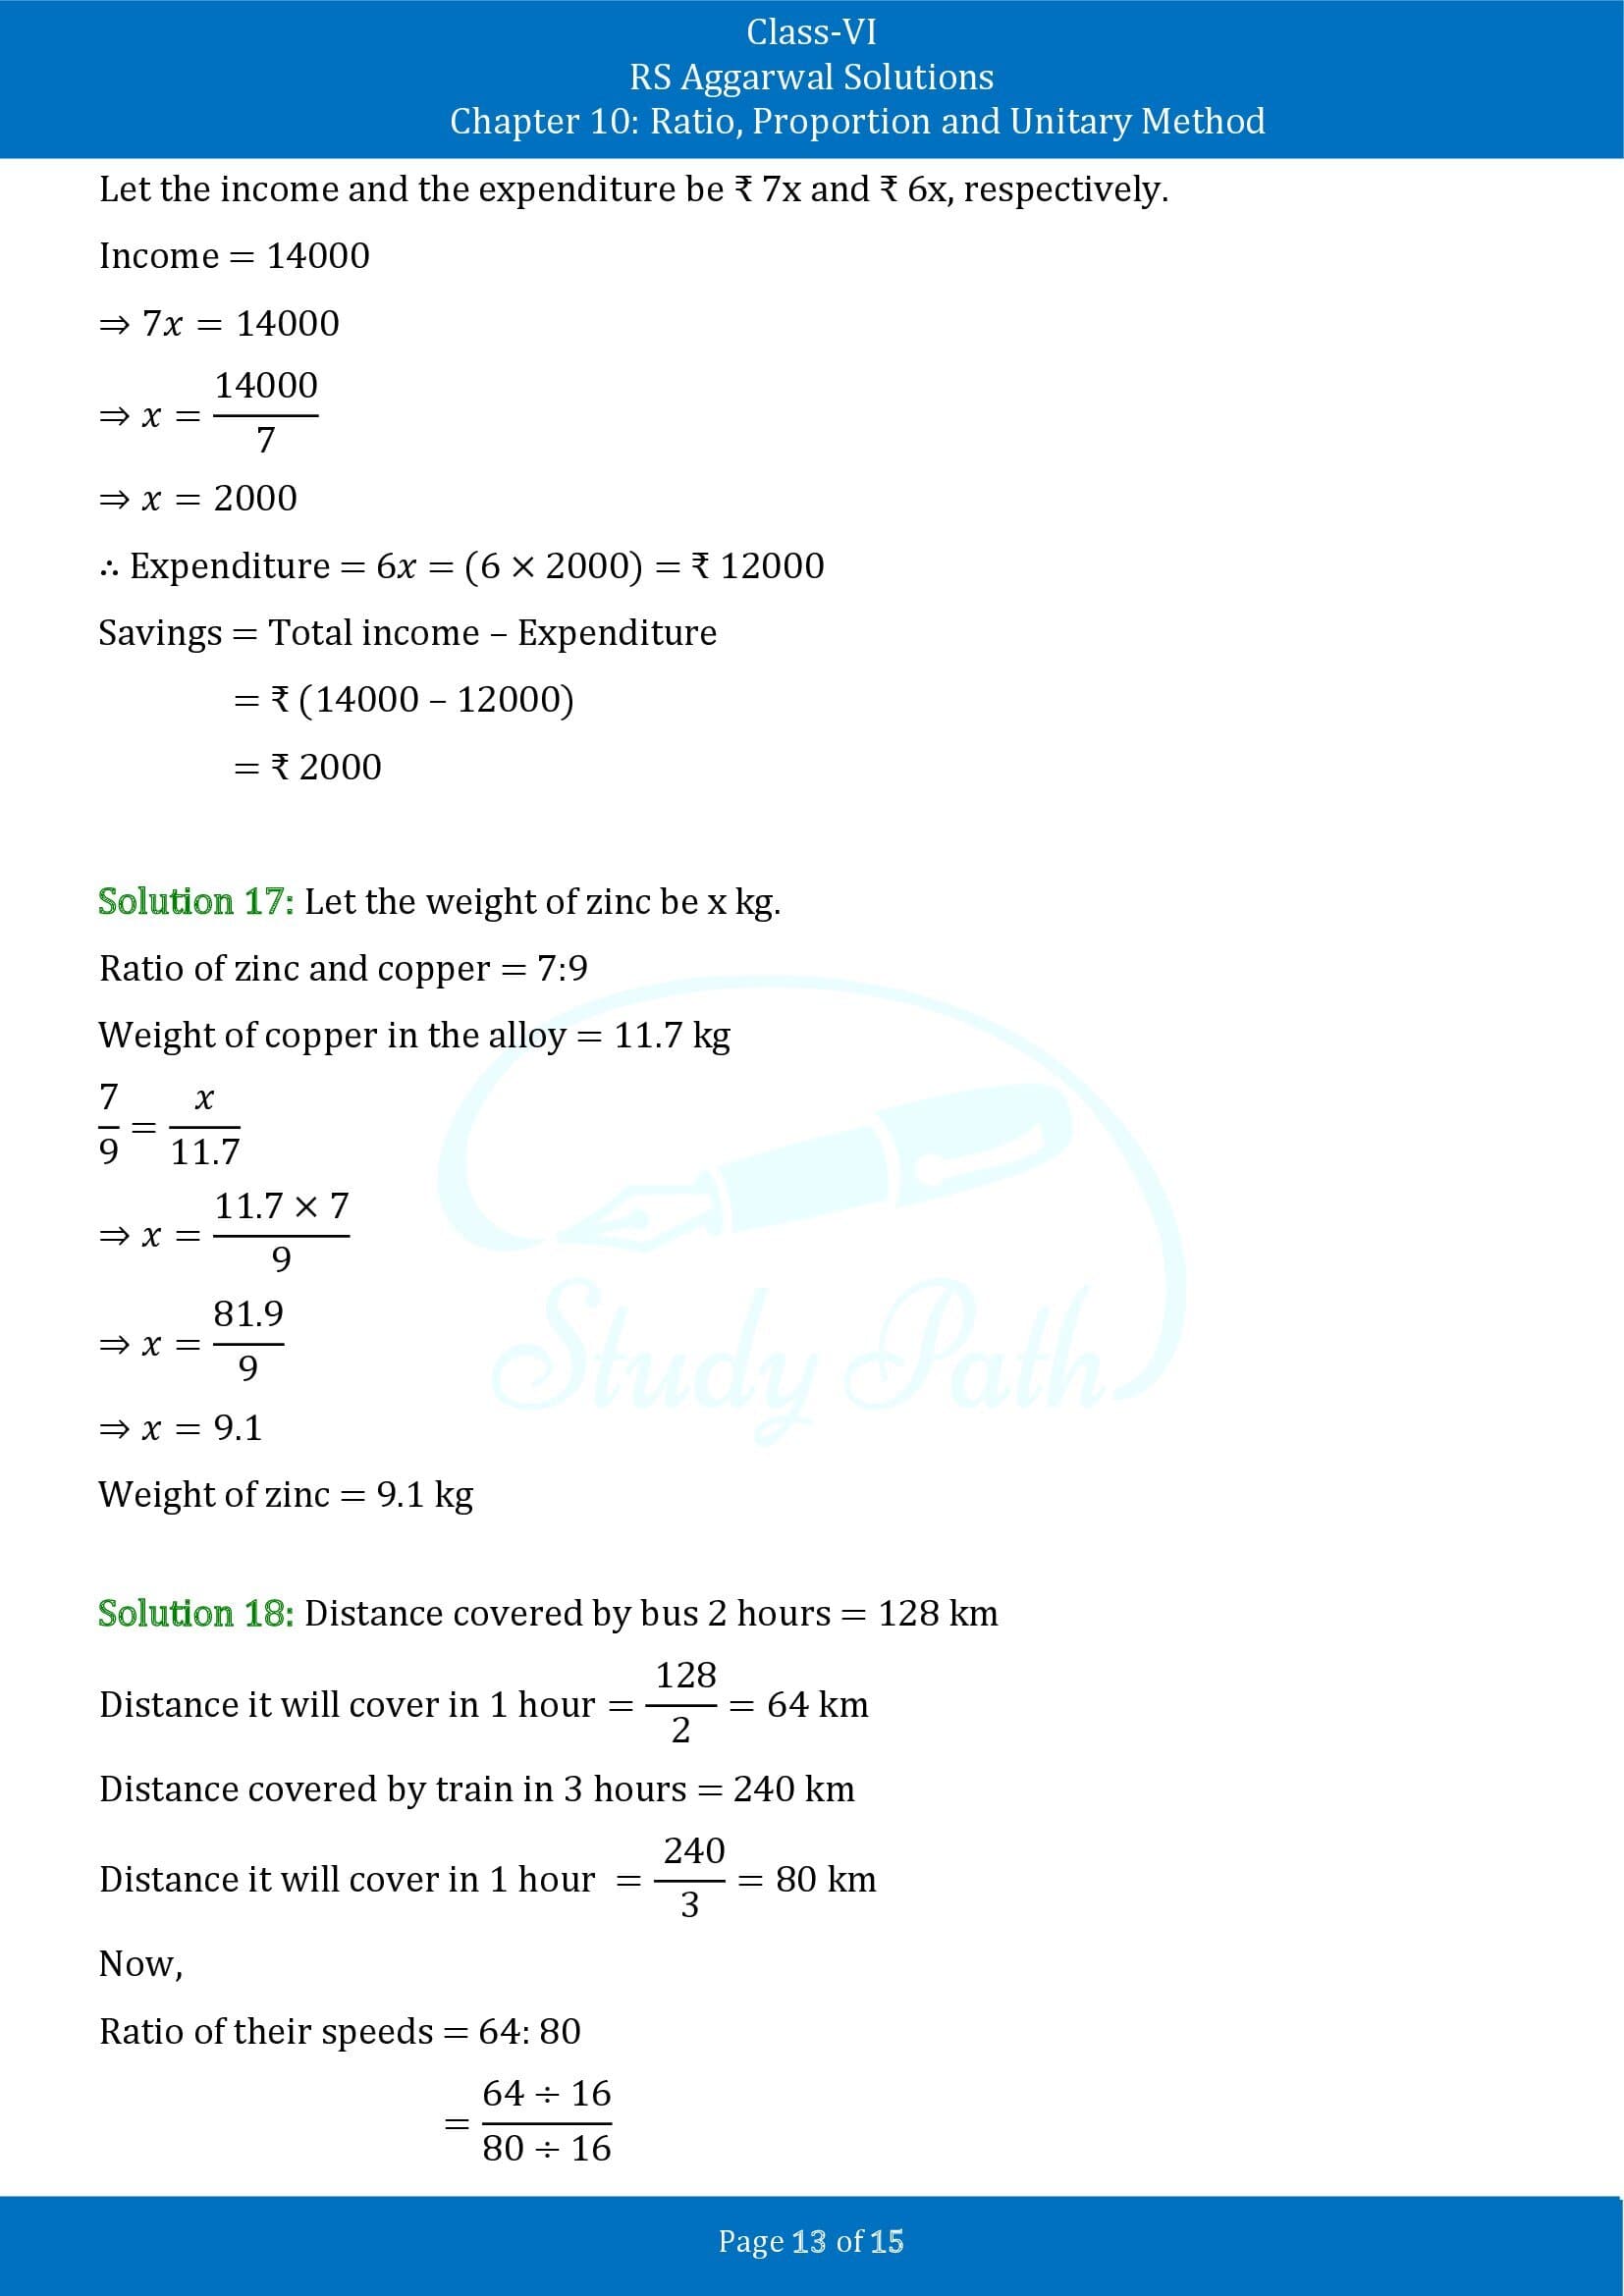 RS Aggarwal Solutions Class 6 Chapter 10 Ratio Proportion and Unitary Method Exercise 10A 00013